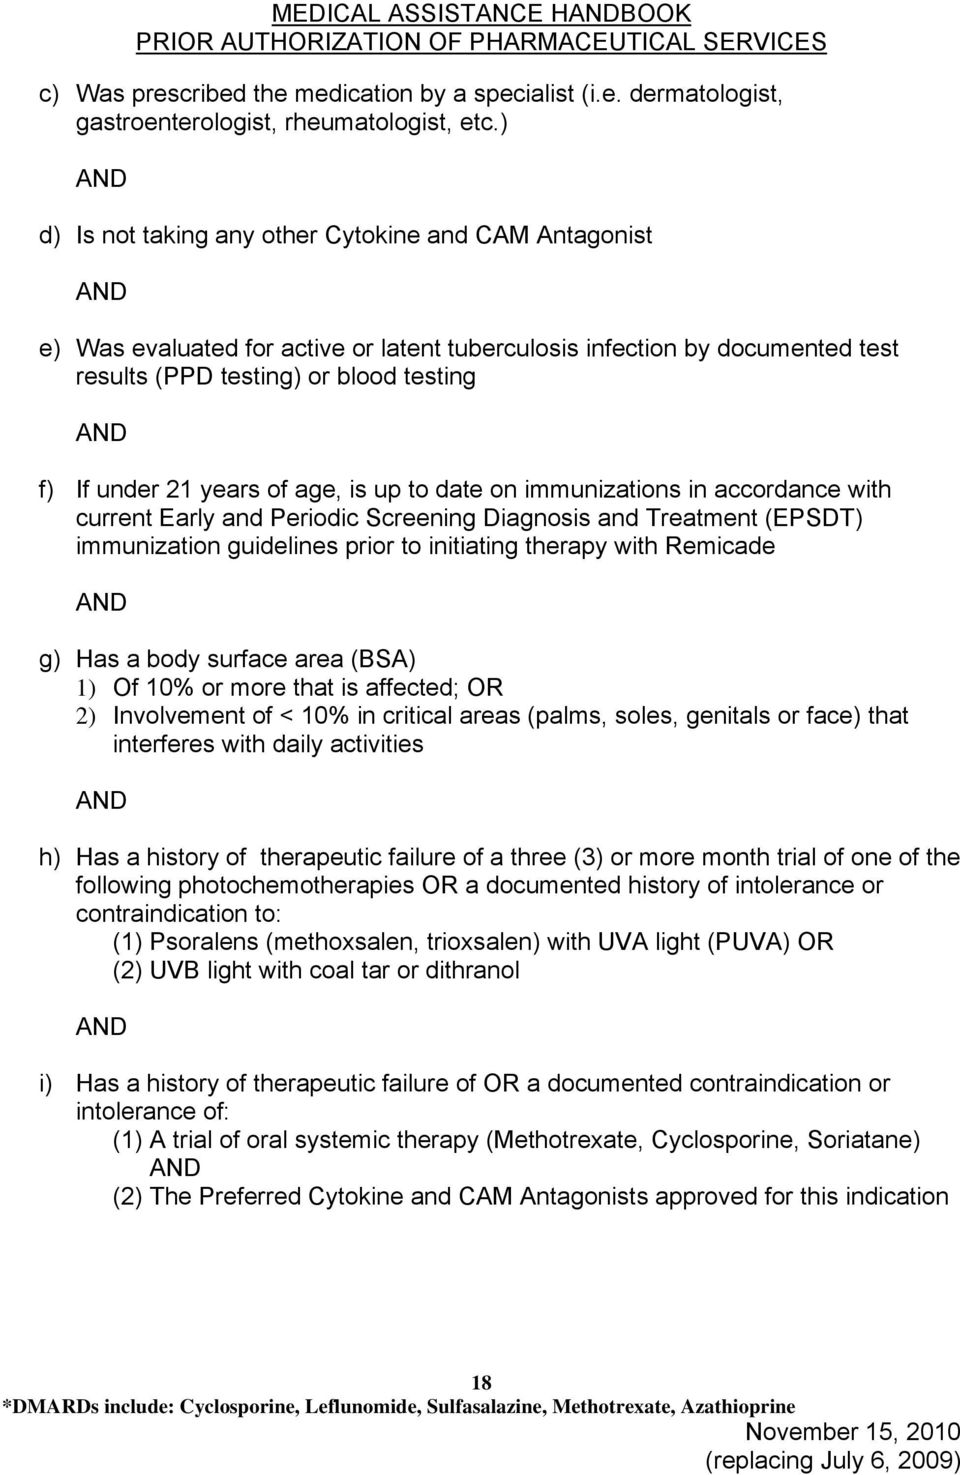 the medication by a specialist (i.e. dermatologist, d) Is not taking any other Cytokine and CAM Antagonist e) Was evaluated for active or latent tuberculosis infection by documented test f) If under